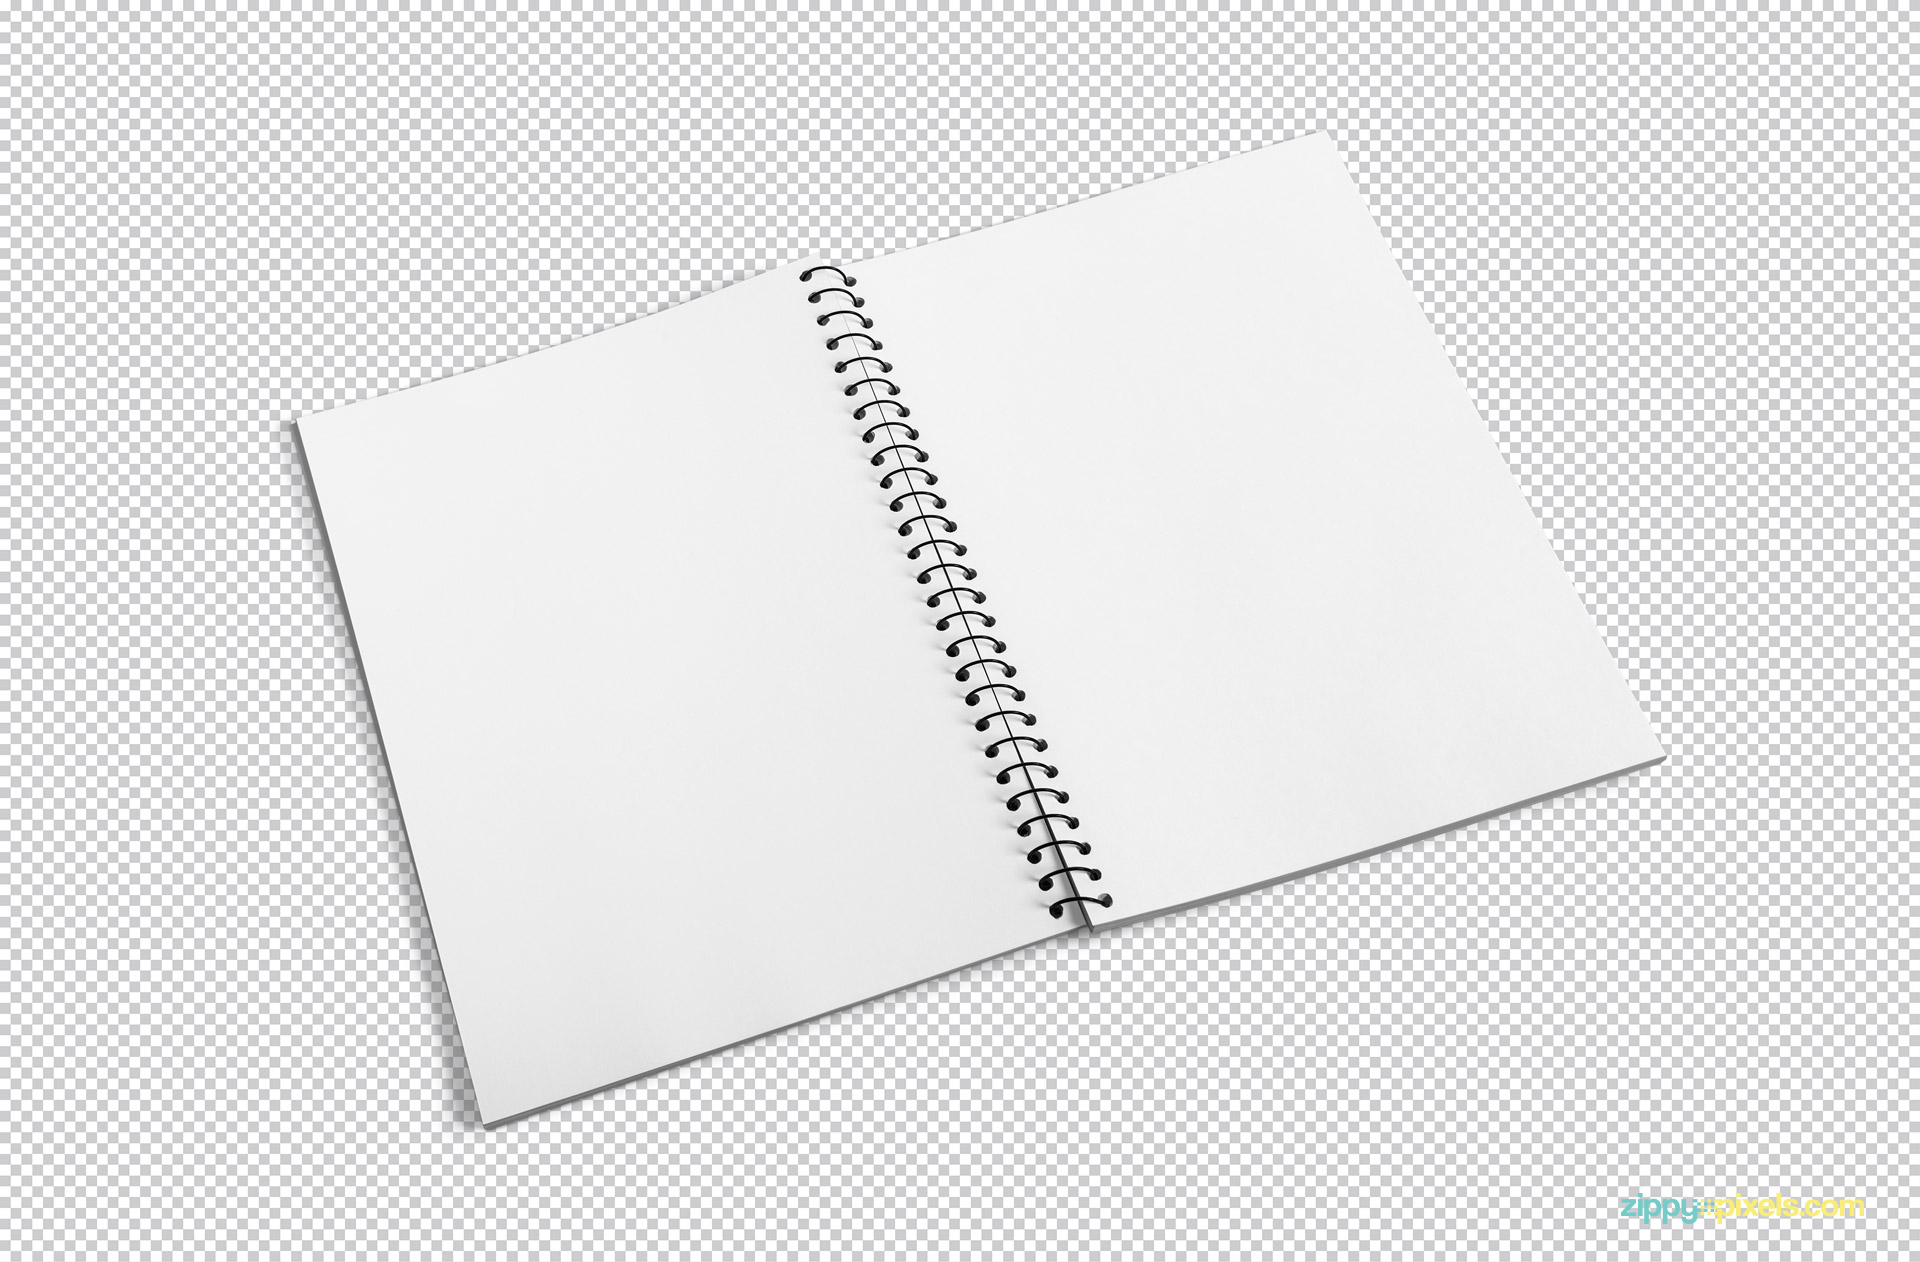 Use Adobe Photoshop each part of this open journal mockup which is fully customizable.